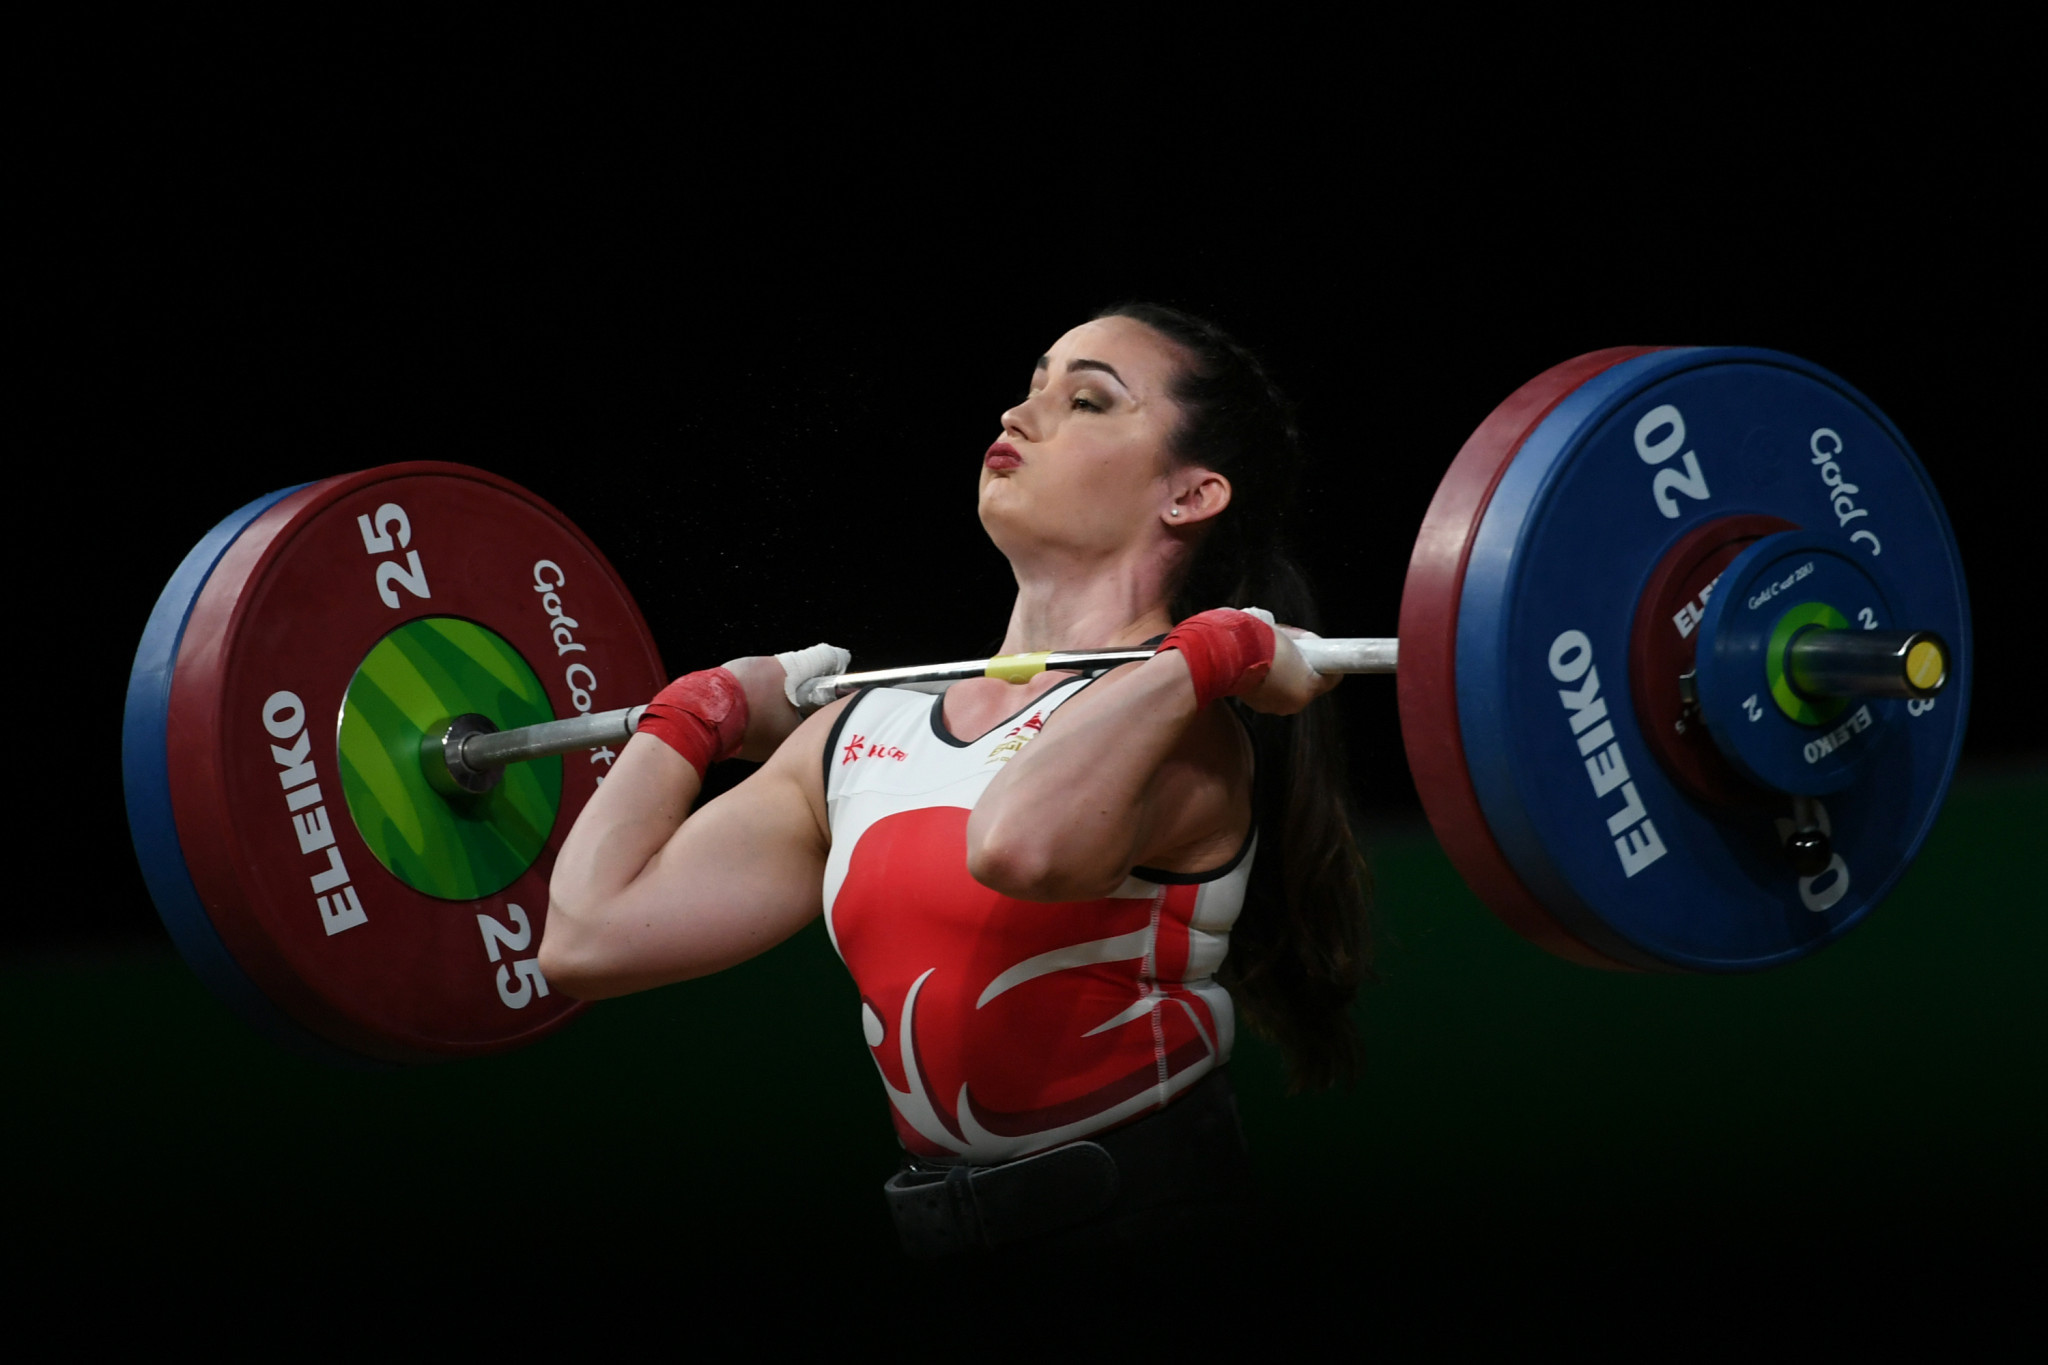 Sarah Davies is another weightlifter impacted by a lack of funding ©Getty Images